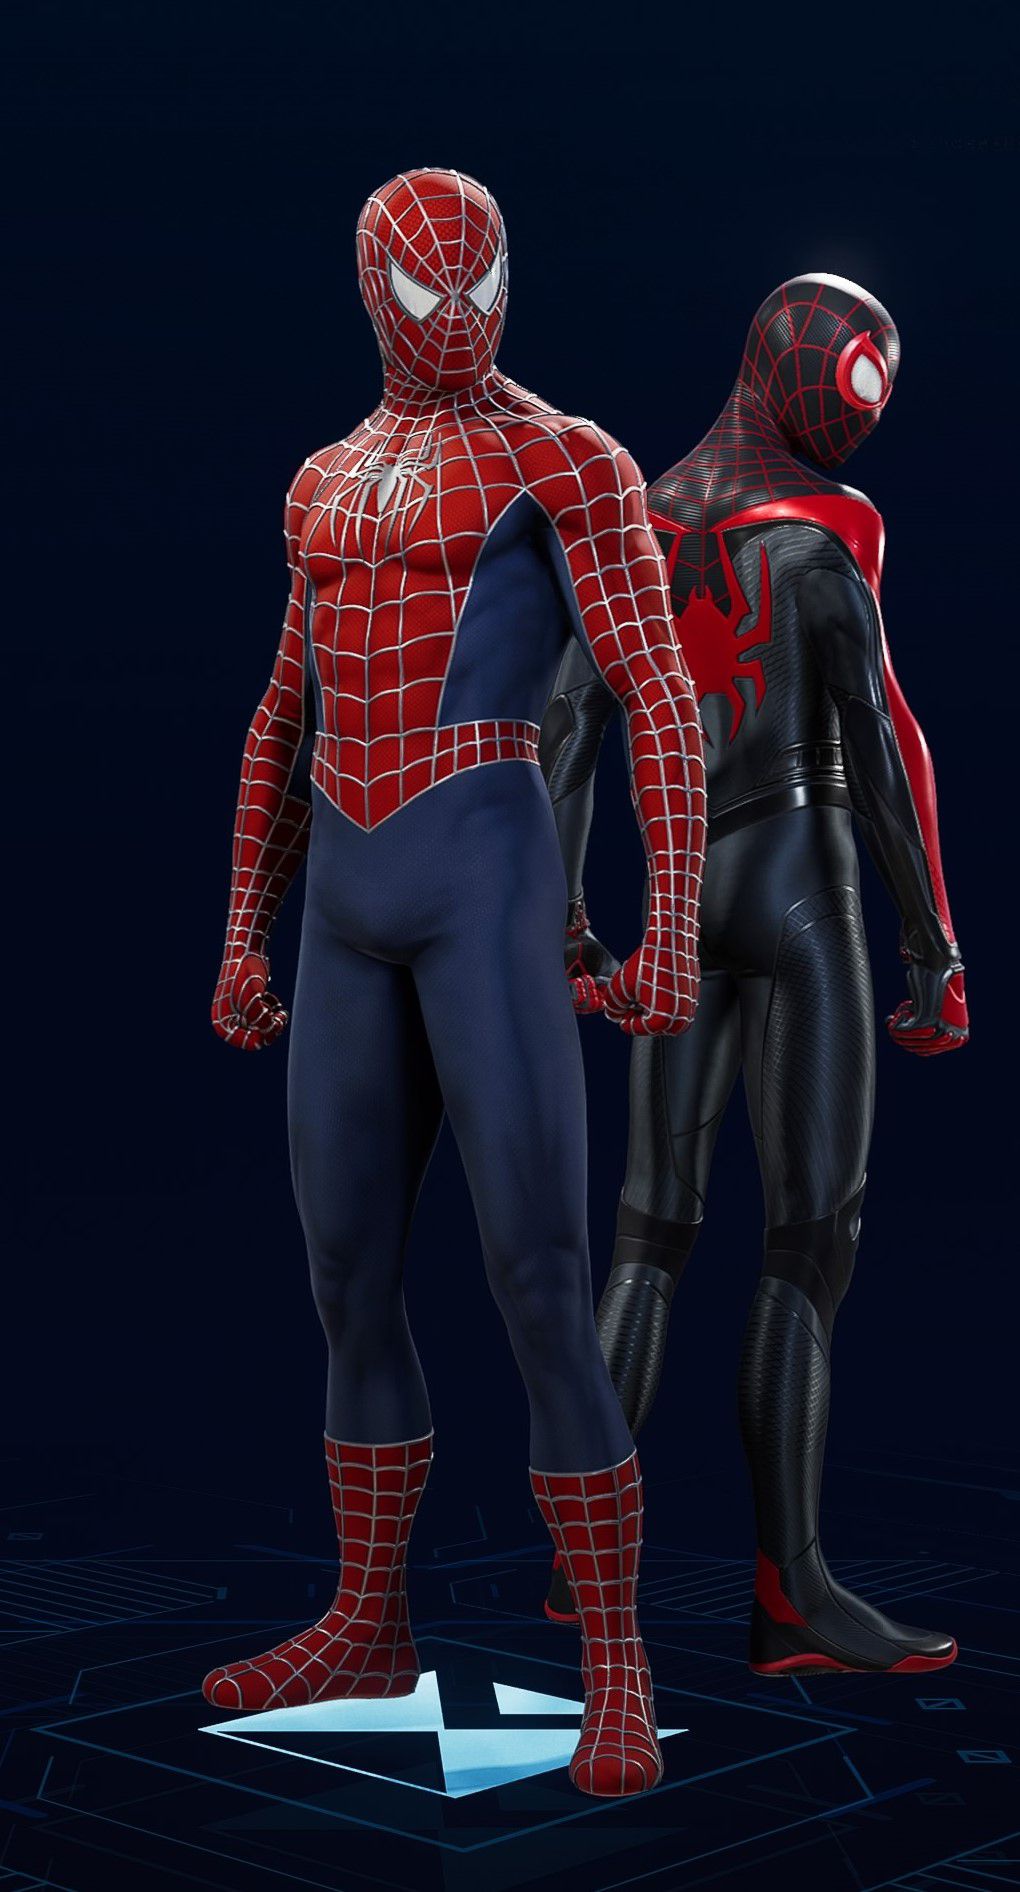 Peter Parker stands in his Webbed Suit in the suit selection screen of Spider-Man 2.